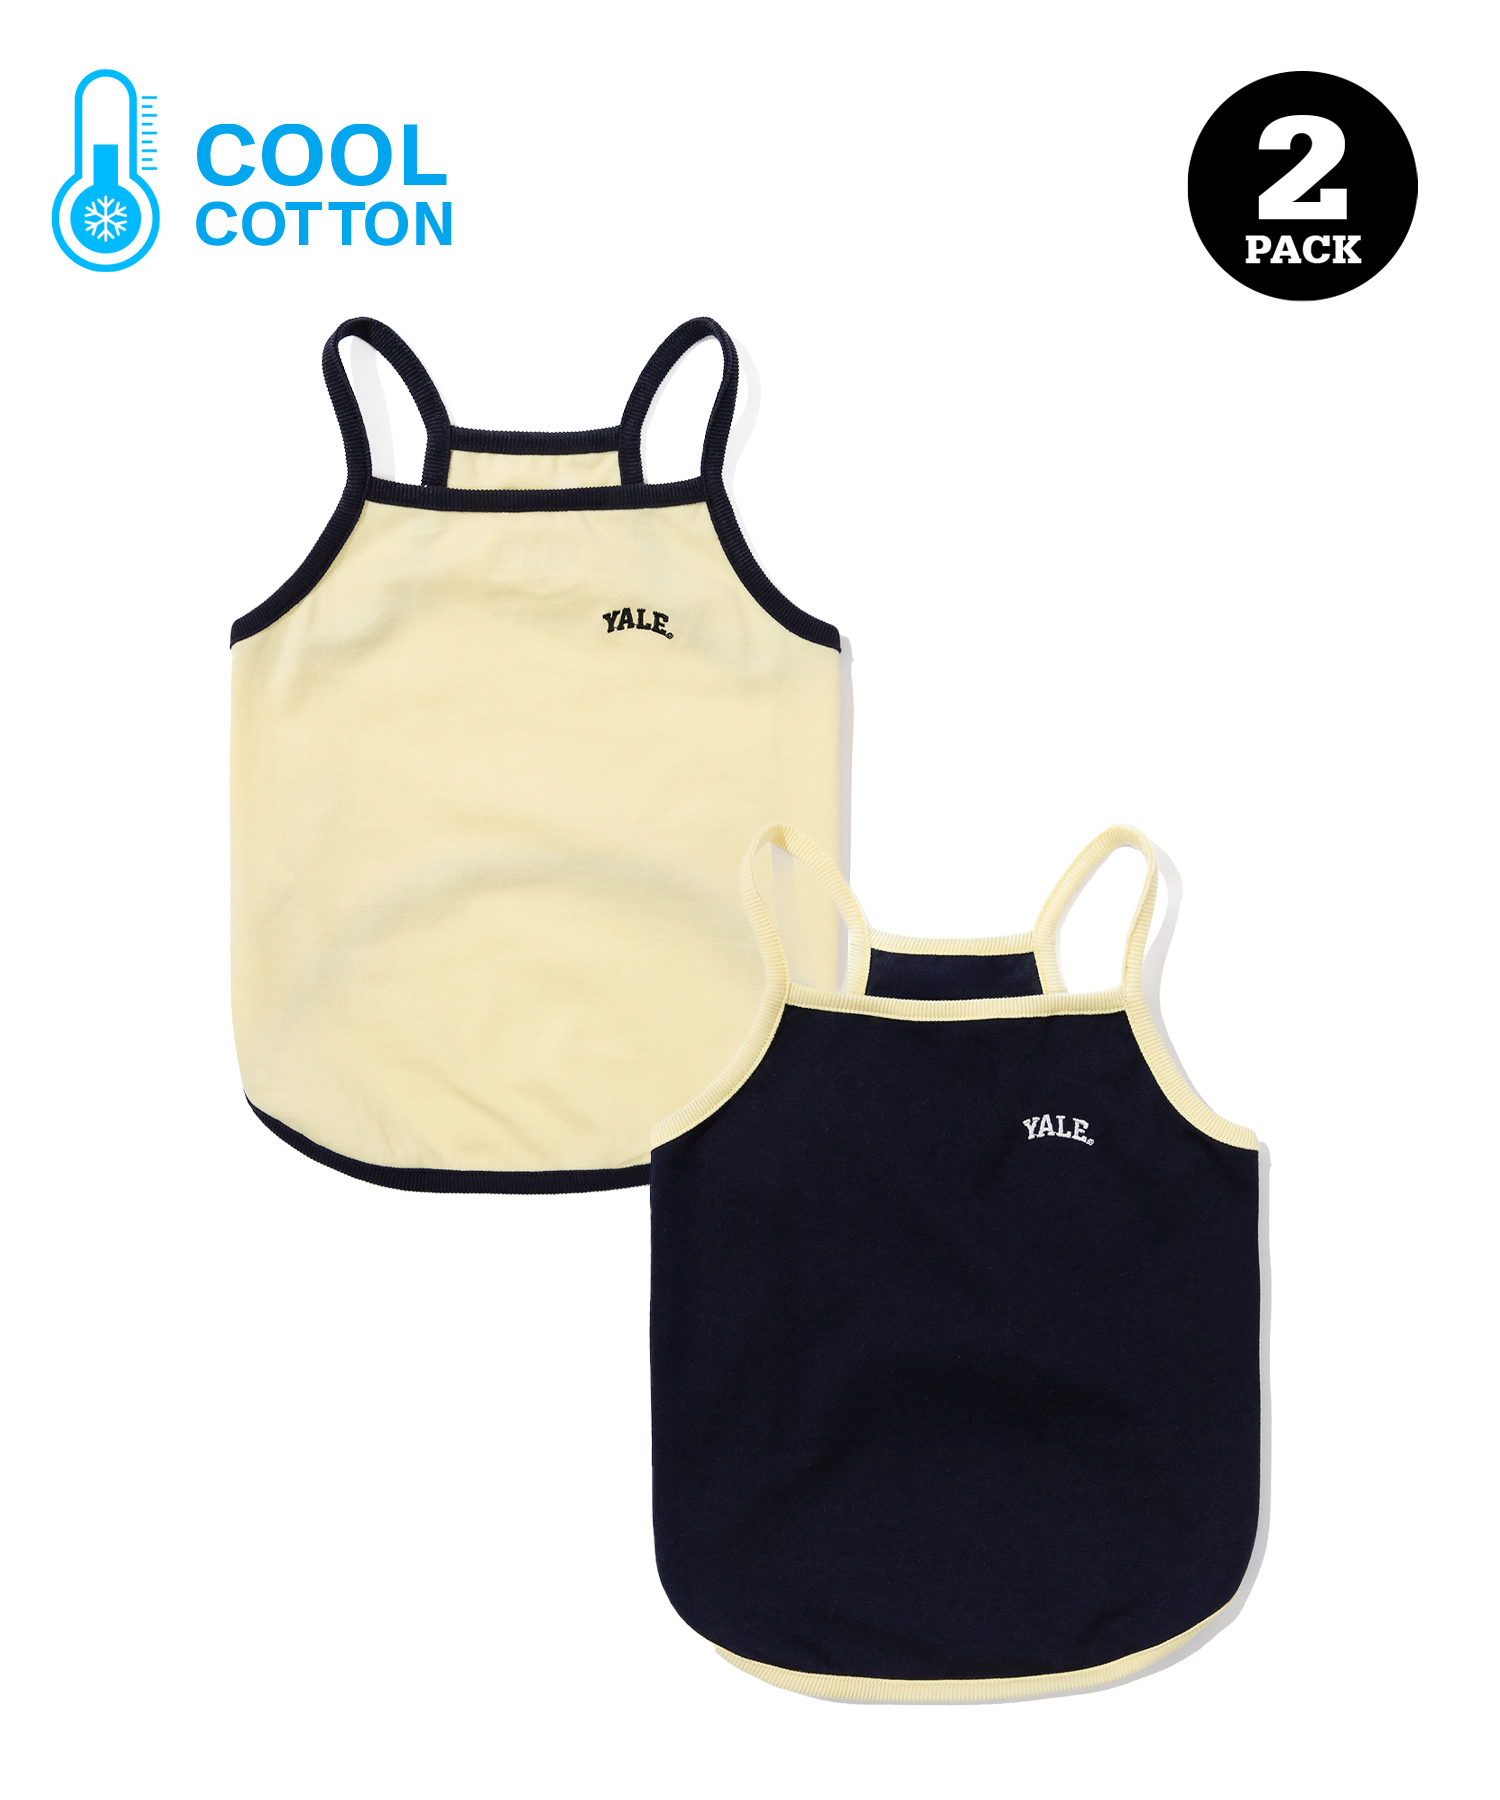 [COOL COTTON] 2PACK SMALL ARCH DOGGY SLEEVELESS NAVY / YELLOW